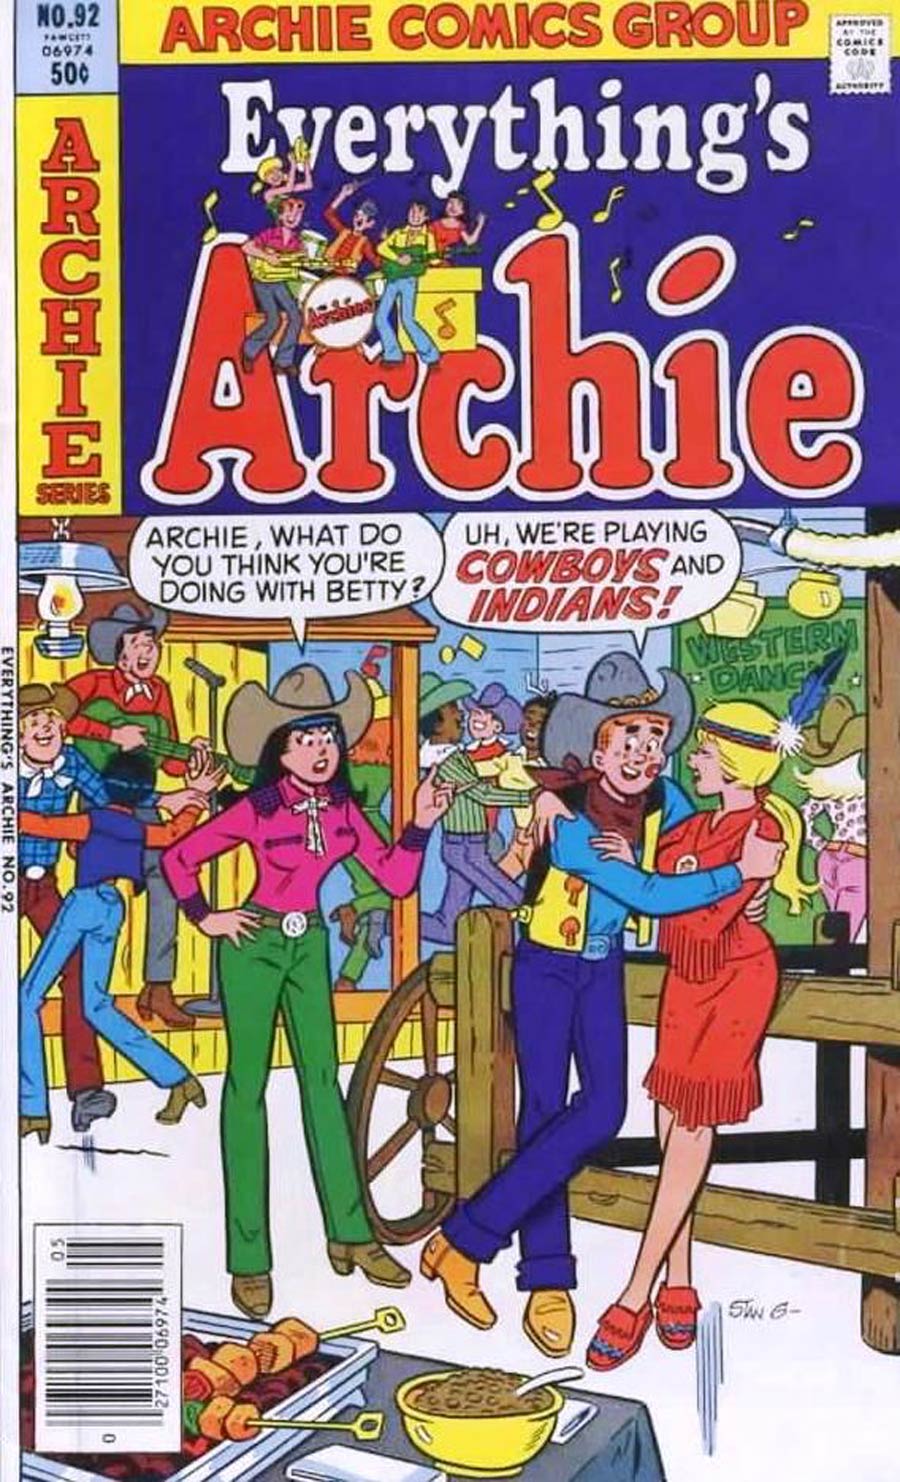 Everythings Archie #92